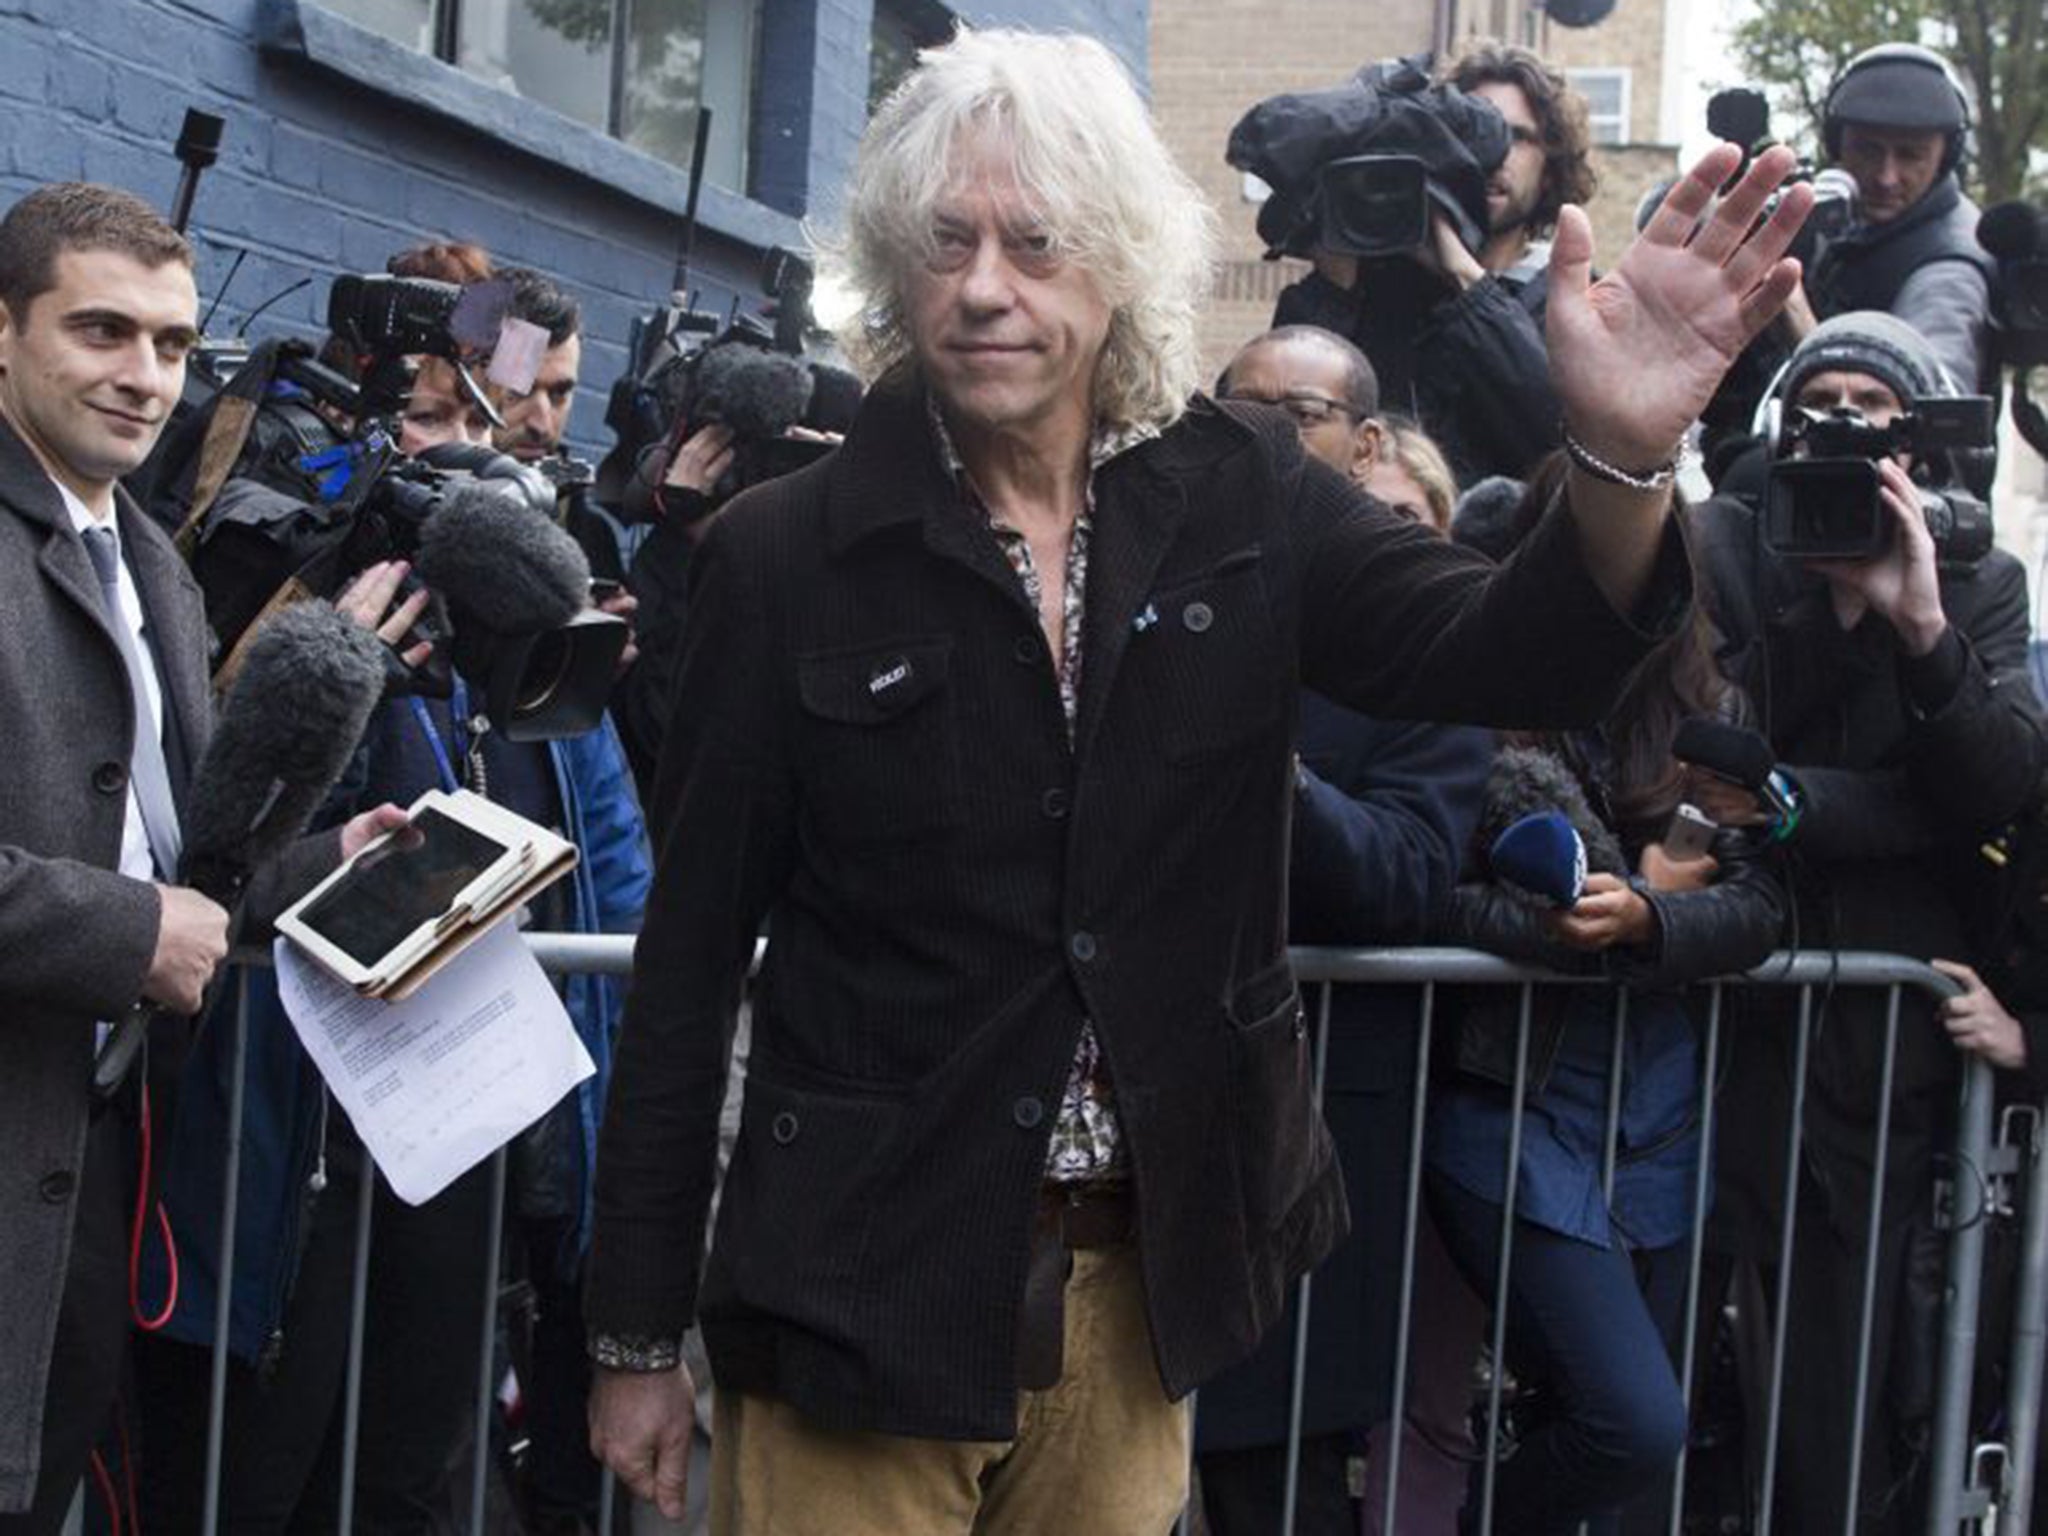 Bob Geldof will be on hand to guide audiences through the show while “explaining how PR has affected modern culture